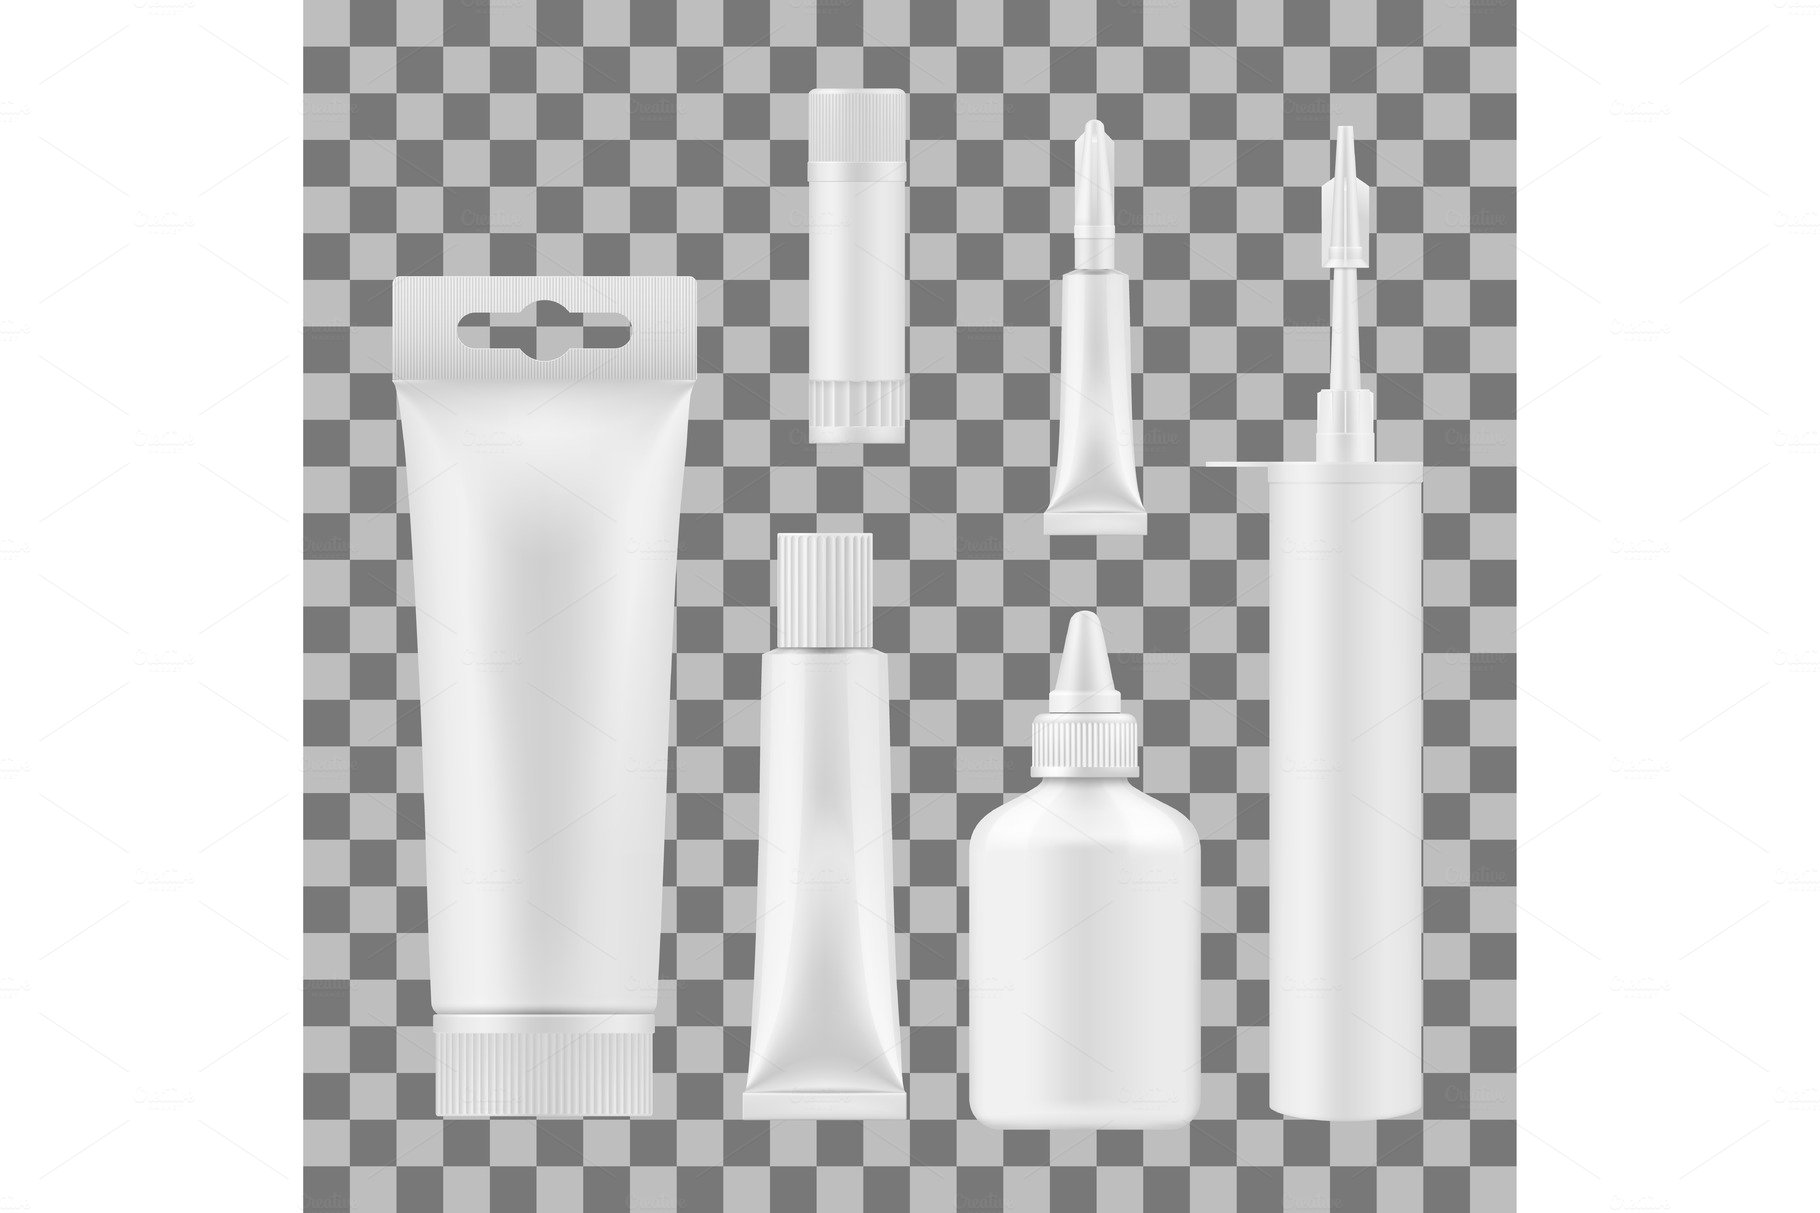 Glue package mockups with tube cover image.